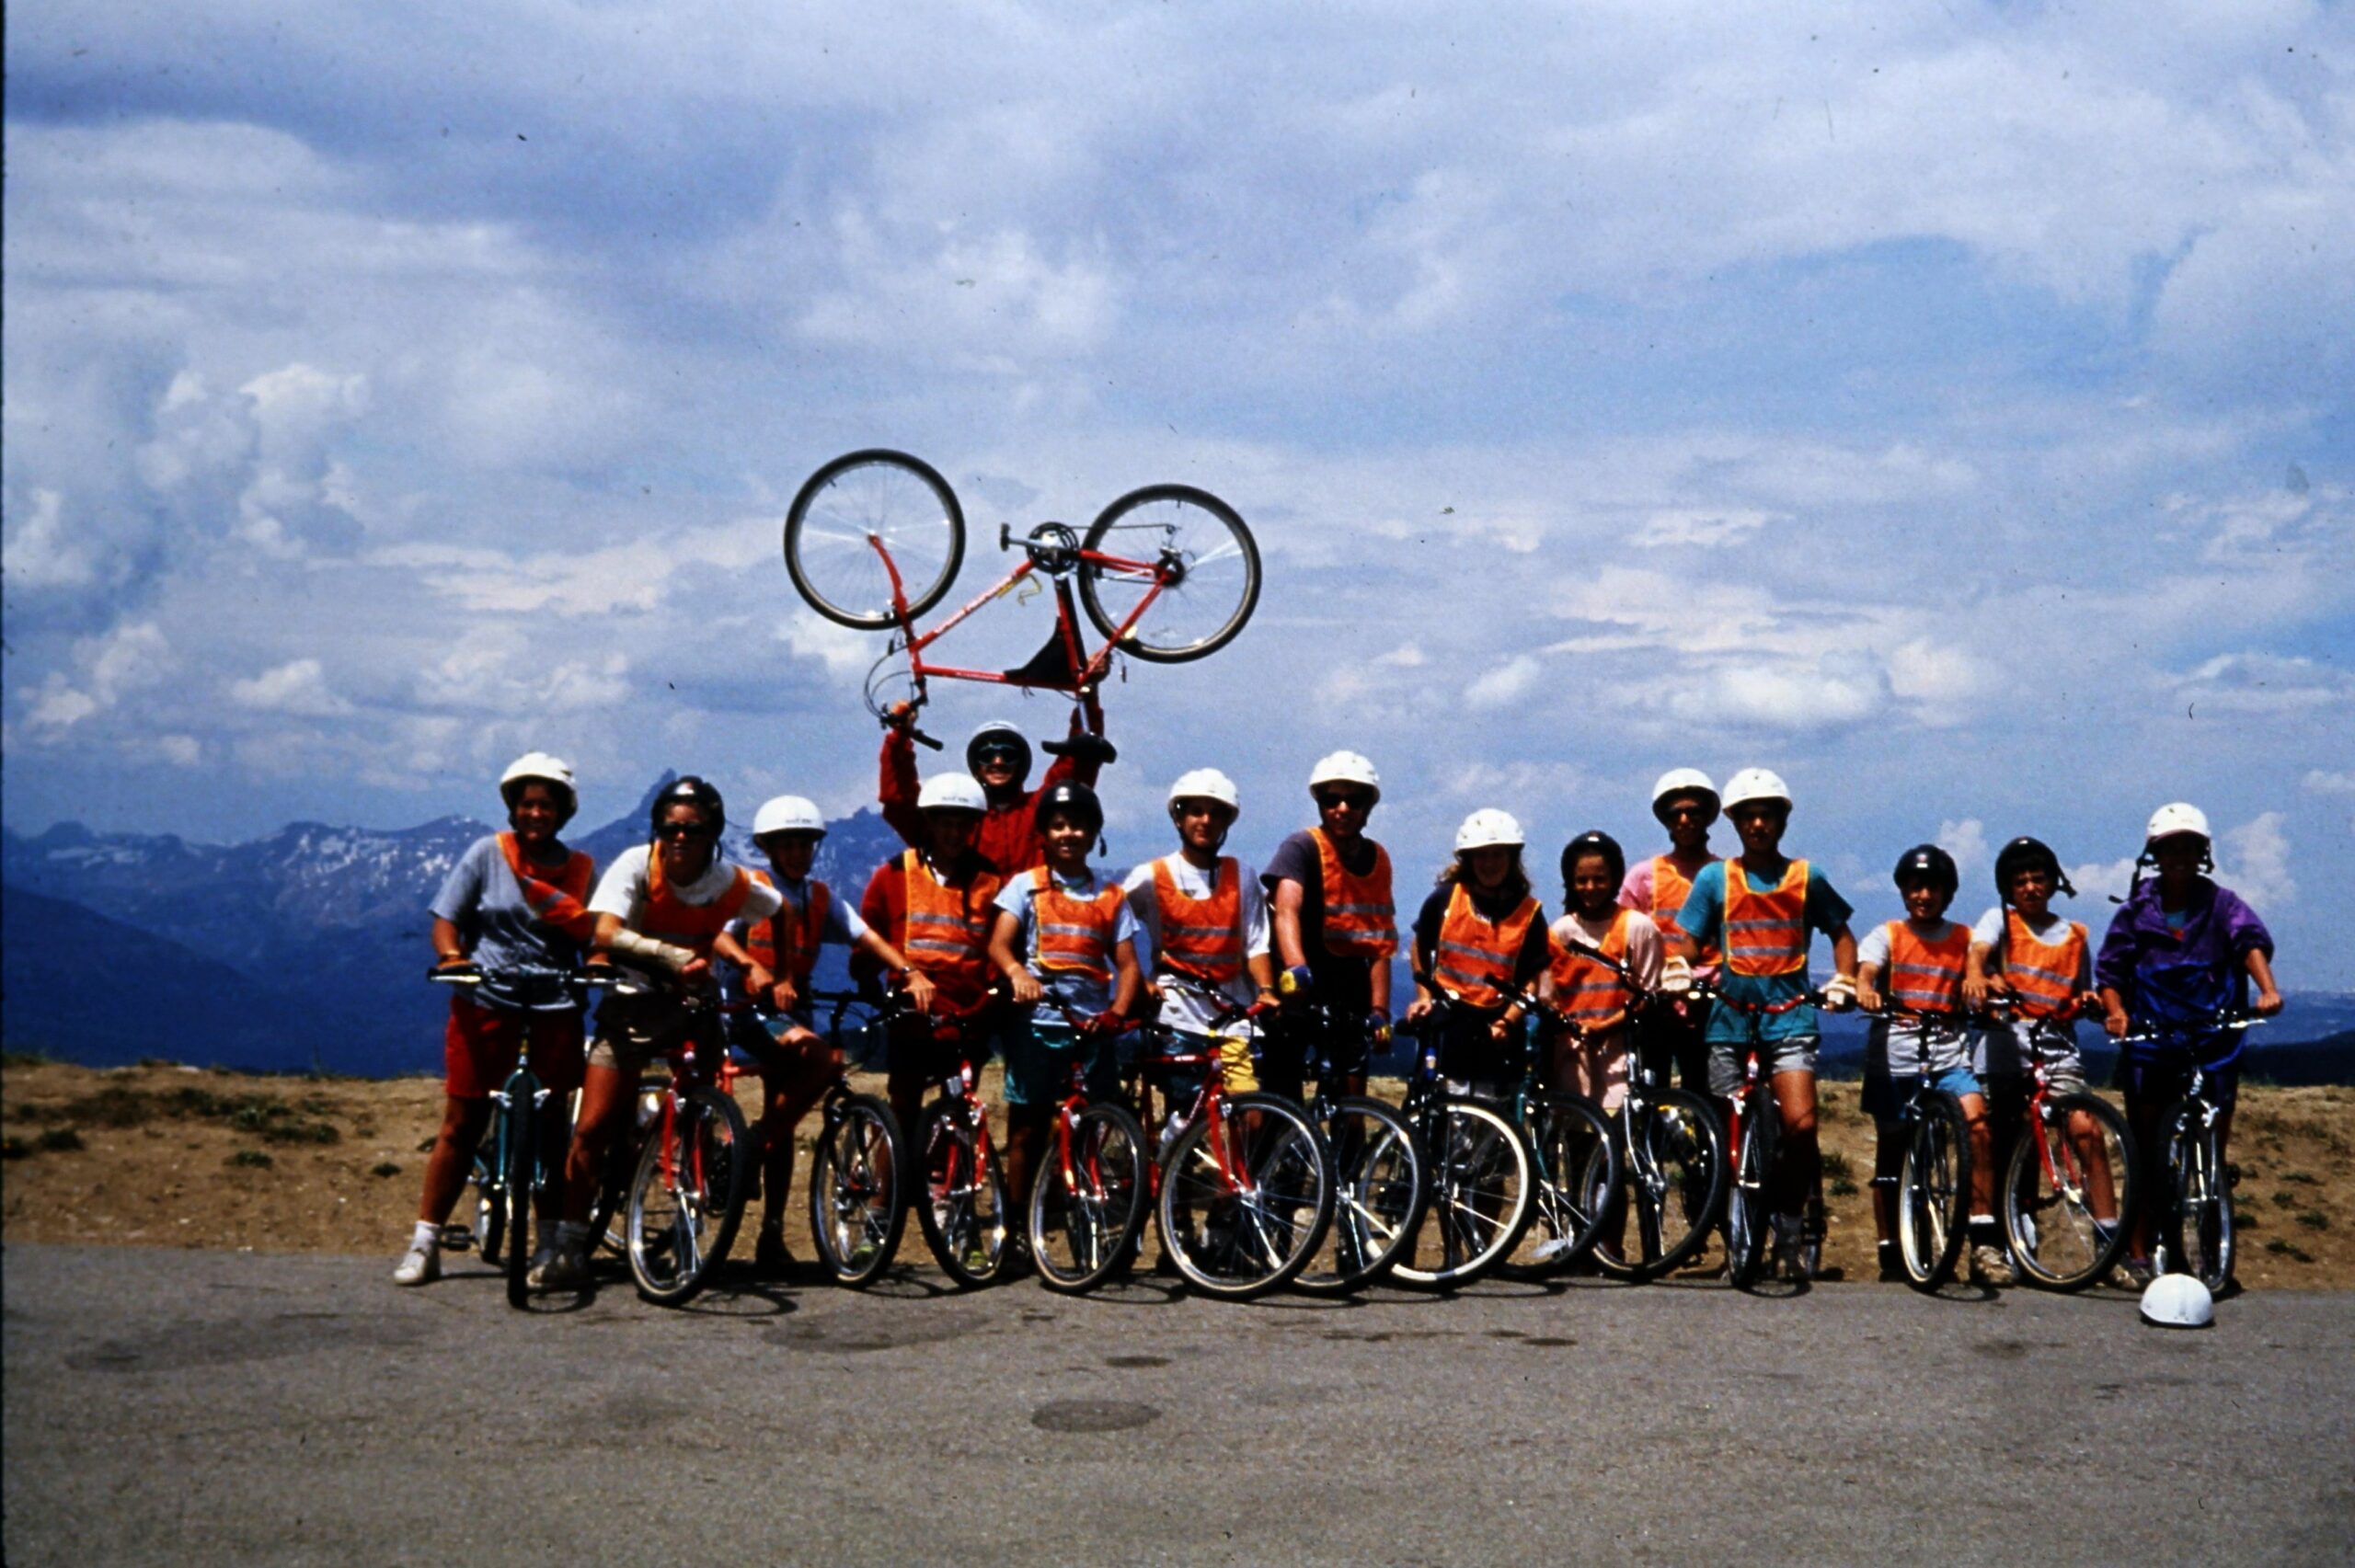 1991 Group Photo with person holding up a bike